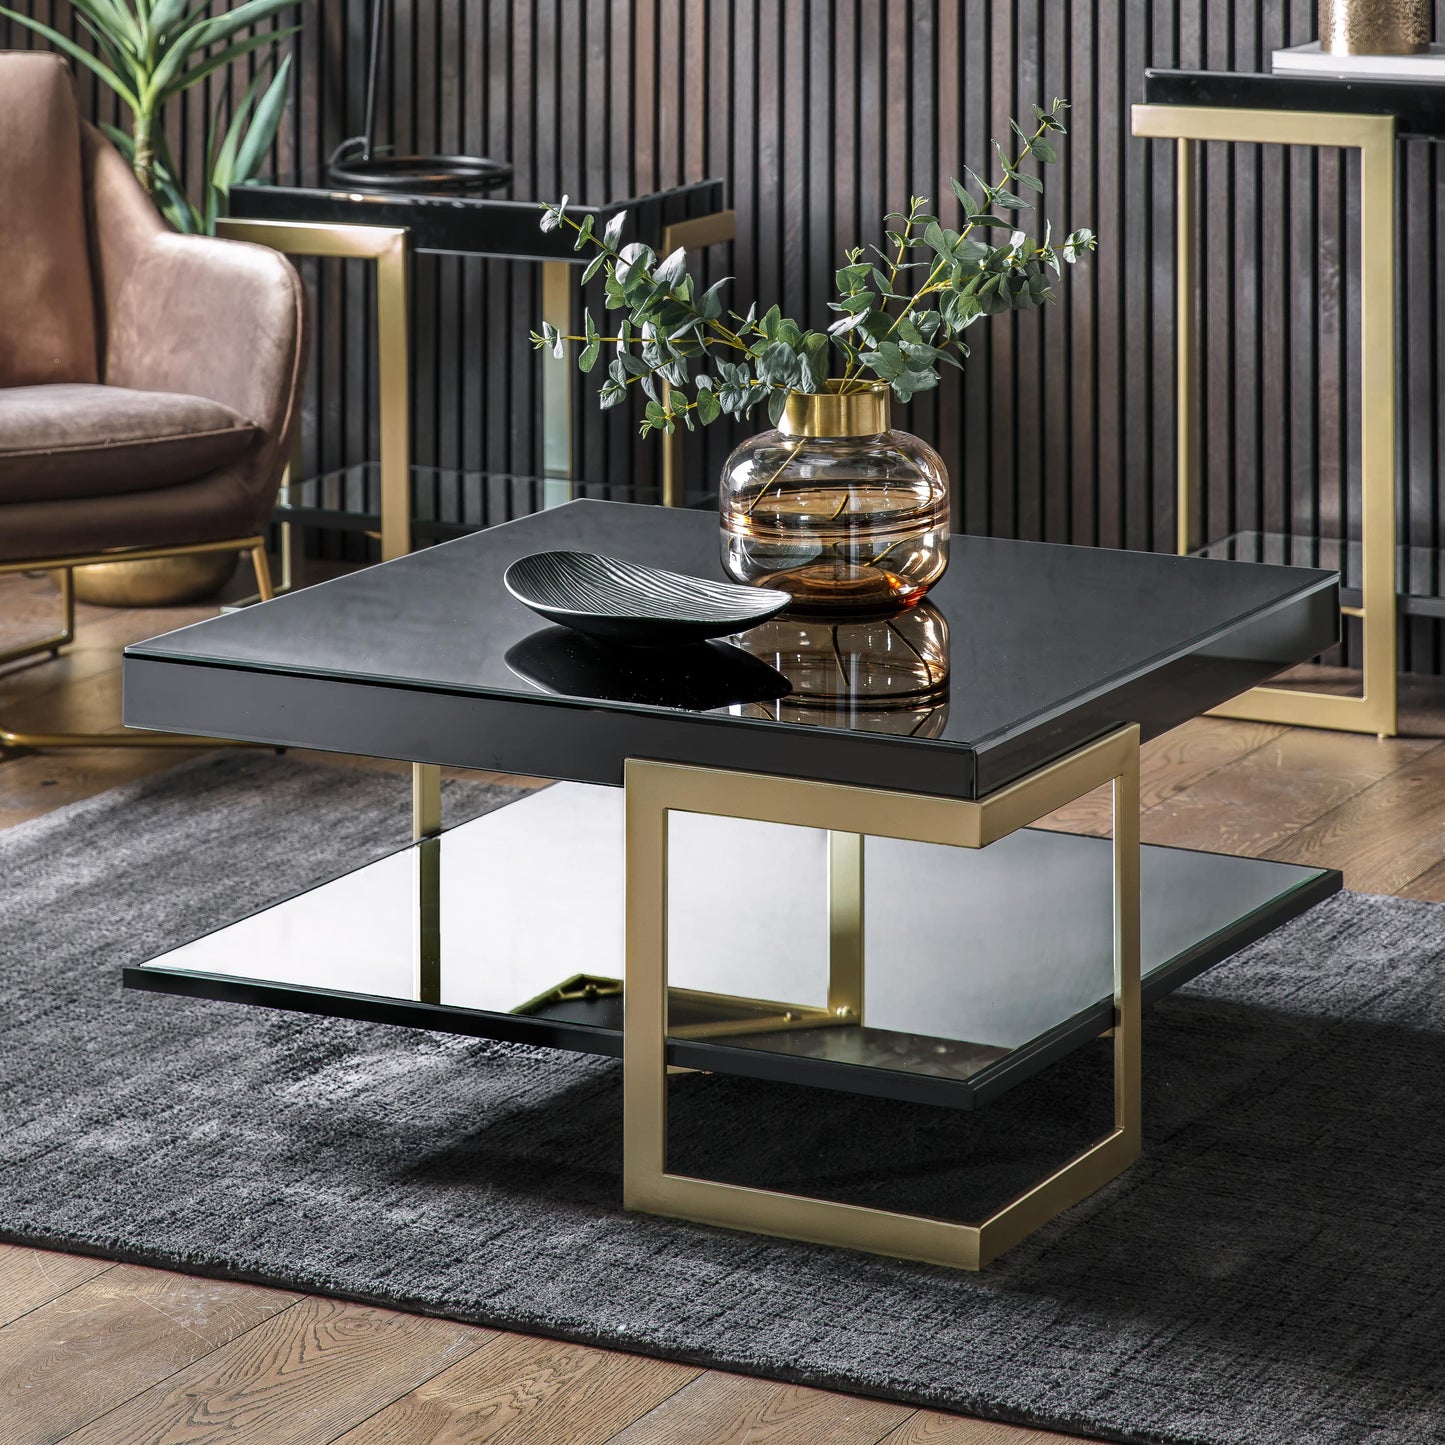 Black and gold contemporary square coffee table in lounge setting